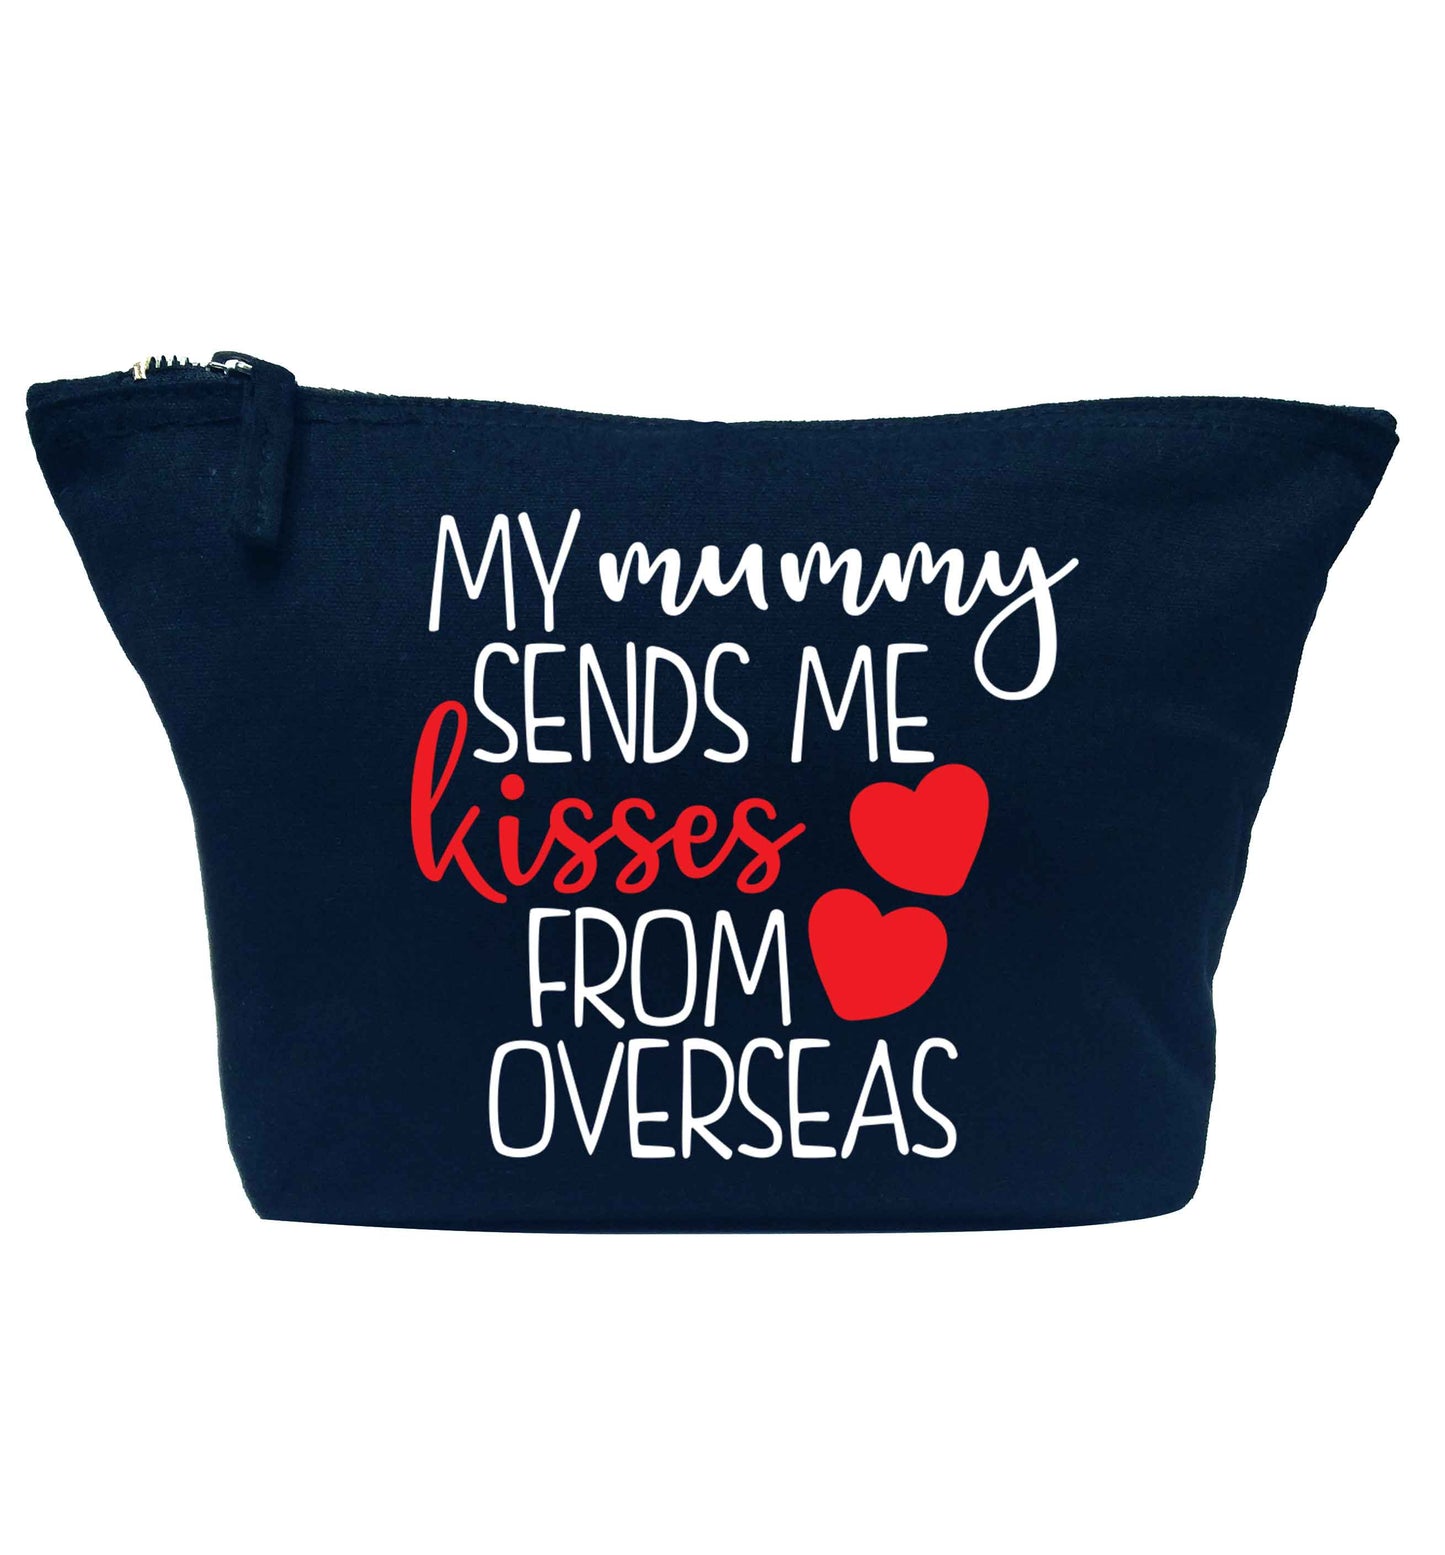 My mummy sends me kisses from overseas navy makeup bag